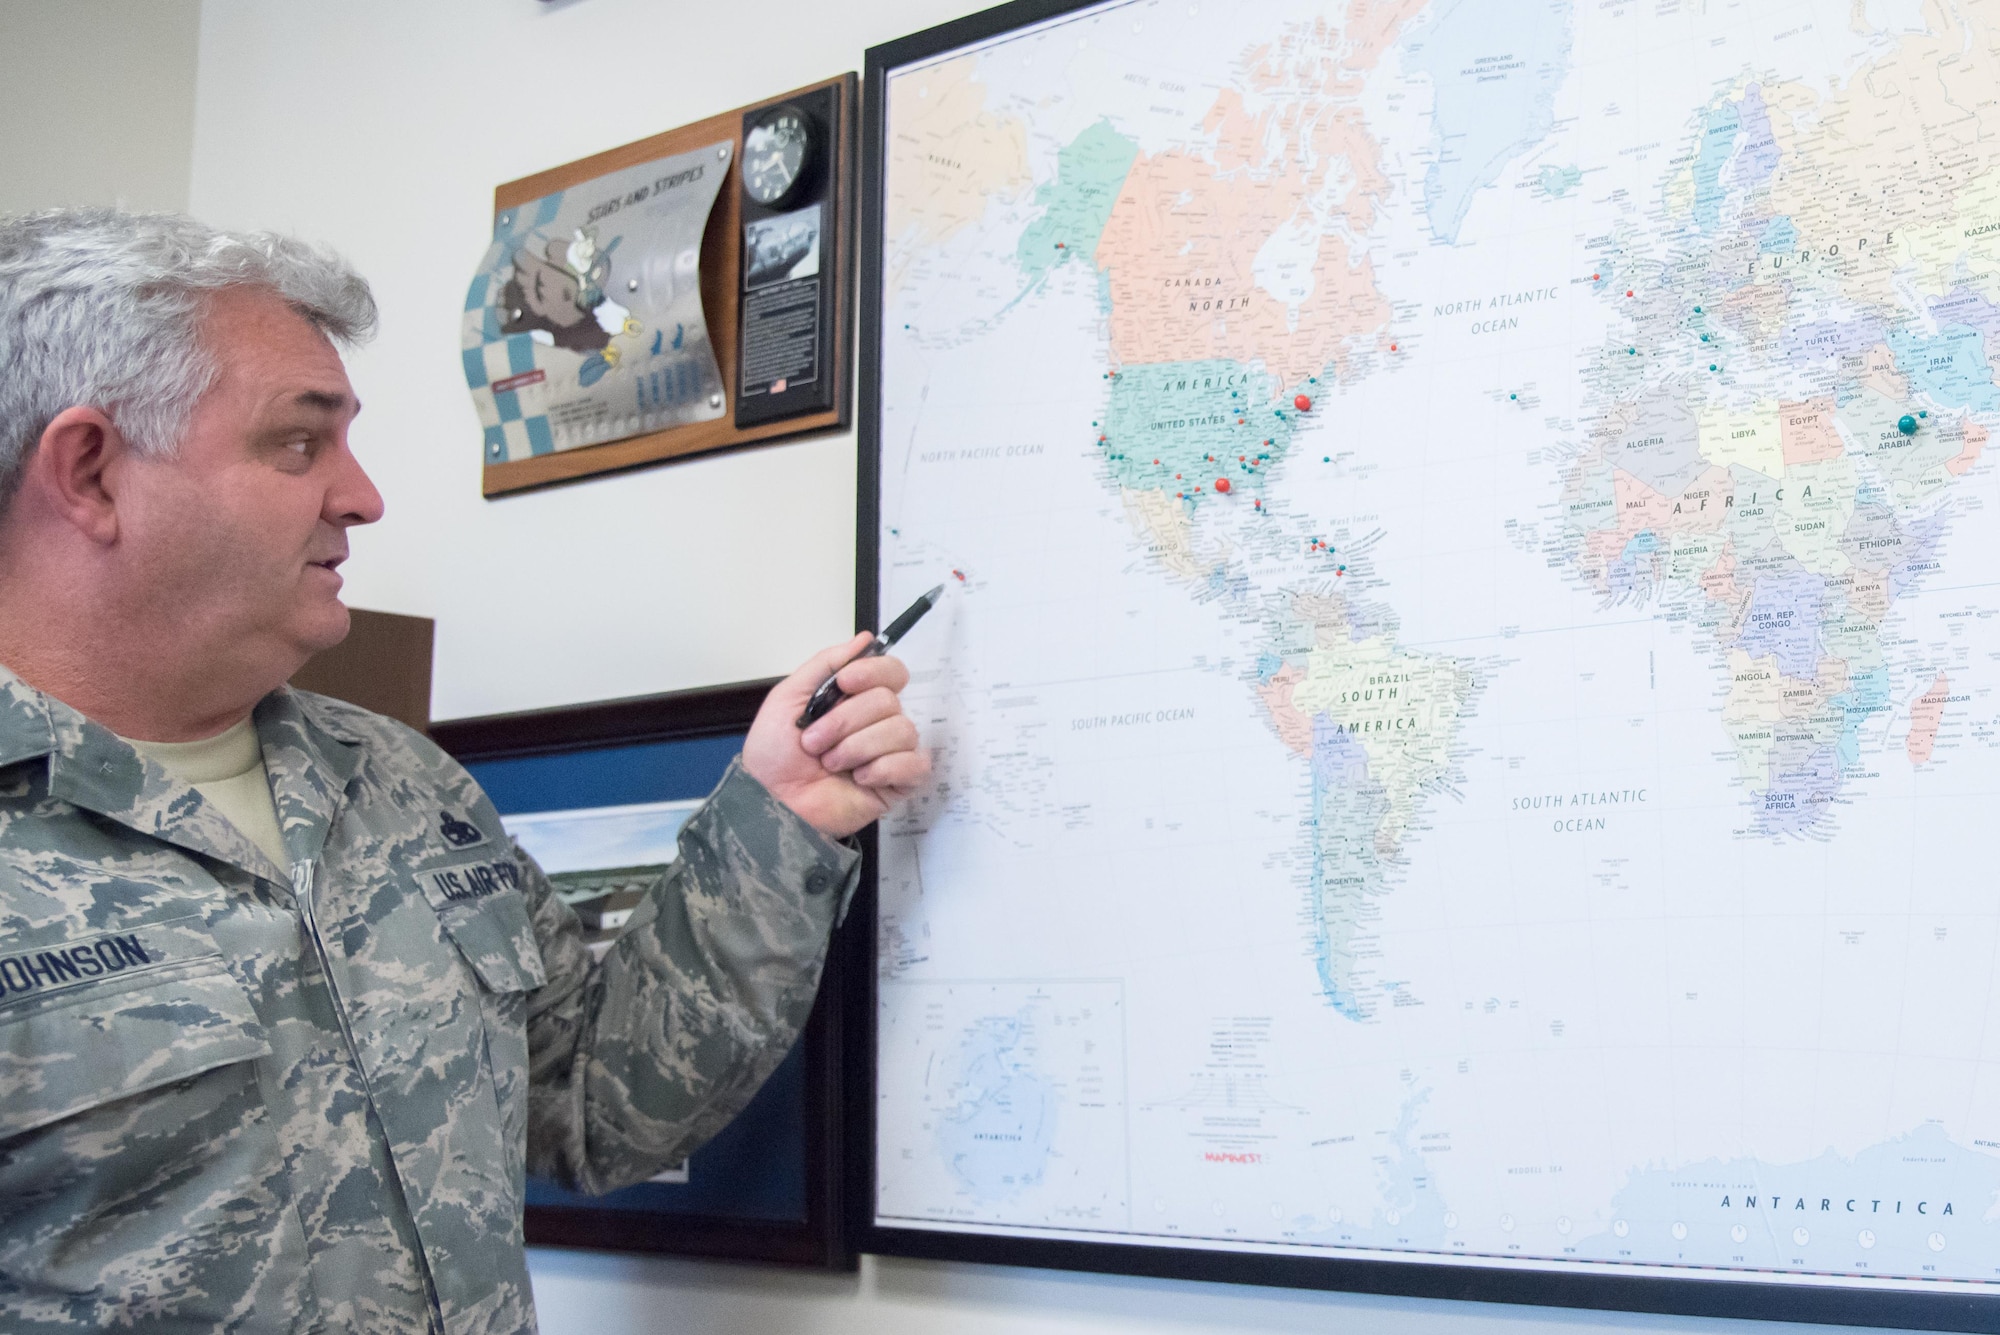 Senior Master Sgt. Eric H. Johnson III, 403rd Maintenance Sqadron Propulsion Flight chief, points at a pushpin map where he tracks the places he's been throughout his 32-year Air Force career Oct. 17, 2017 at Keesler Air Force Base Mississippi. (U.S. Air Force photo/Staff Sgt. Heather Heiney)